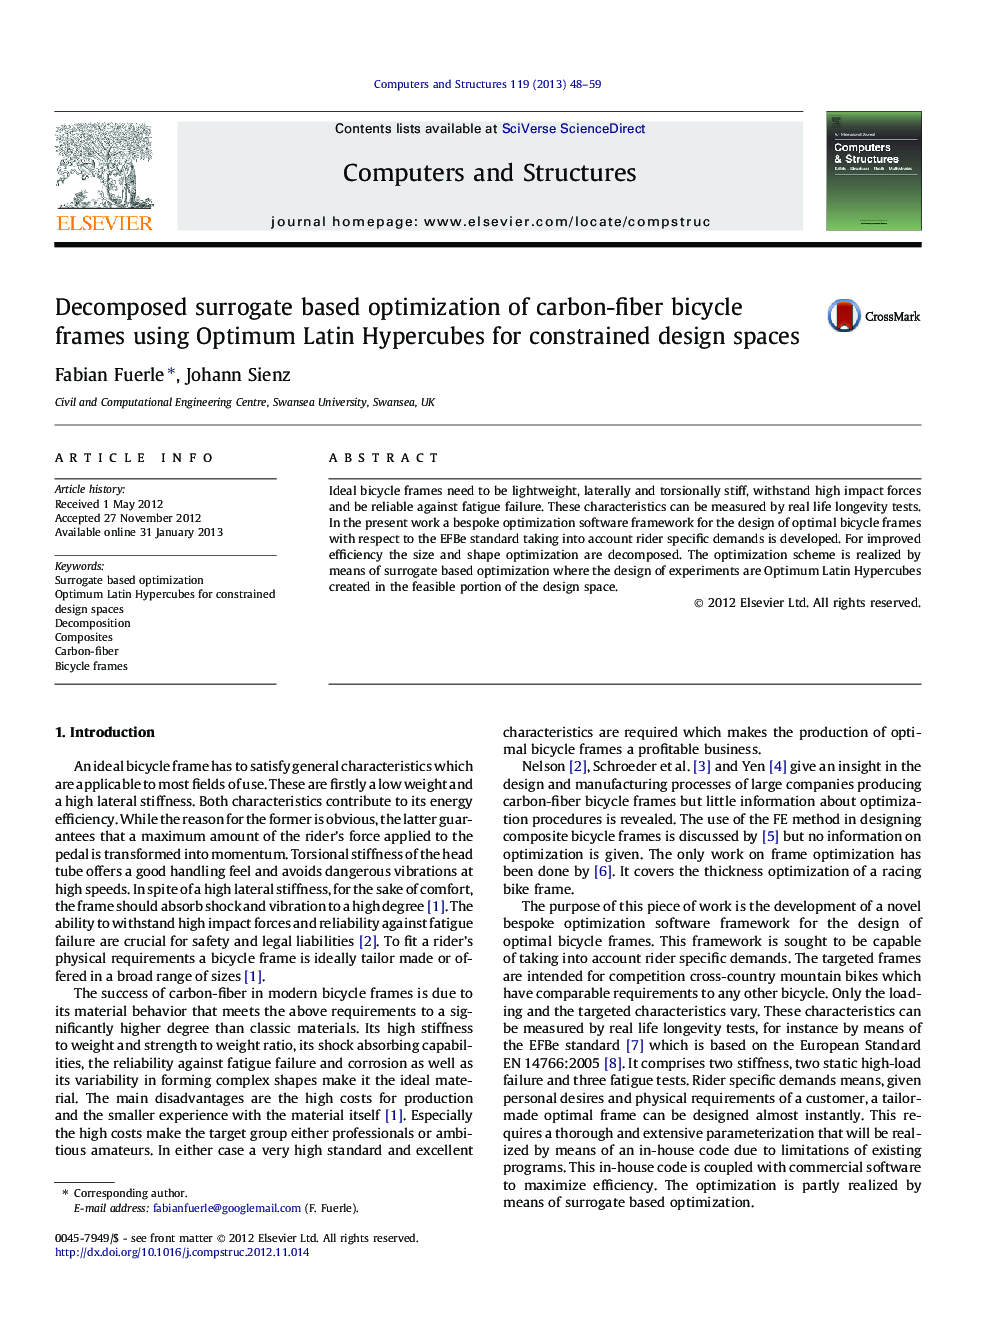 Decomposed surrogate based optimization of carbon-fiber bicycle frames using Optimum Latin Hypercubes for constrained design spaces